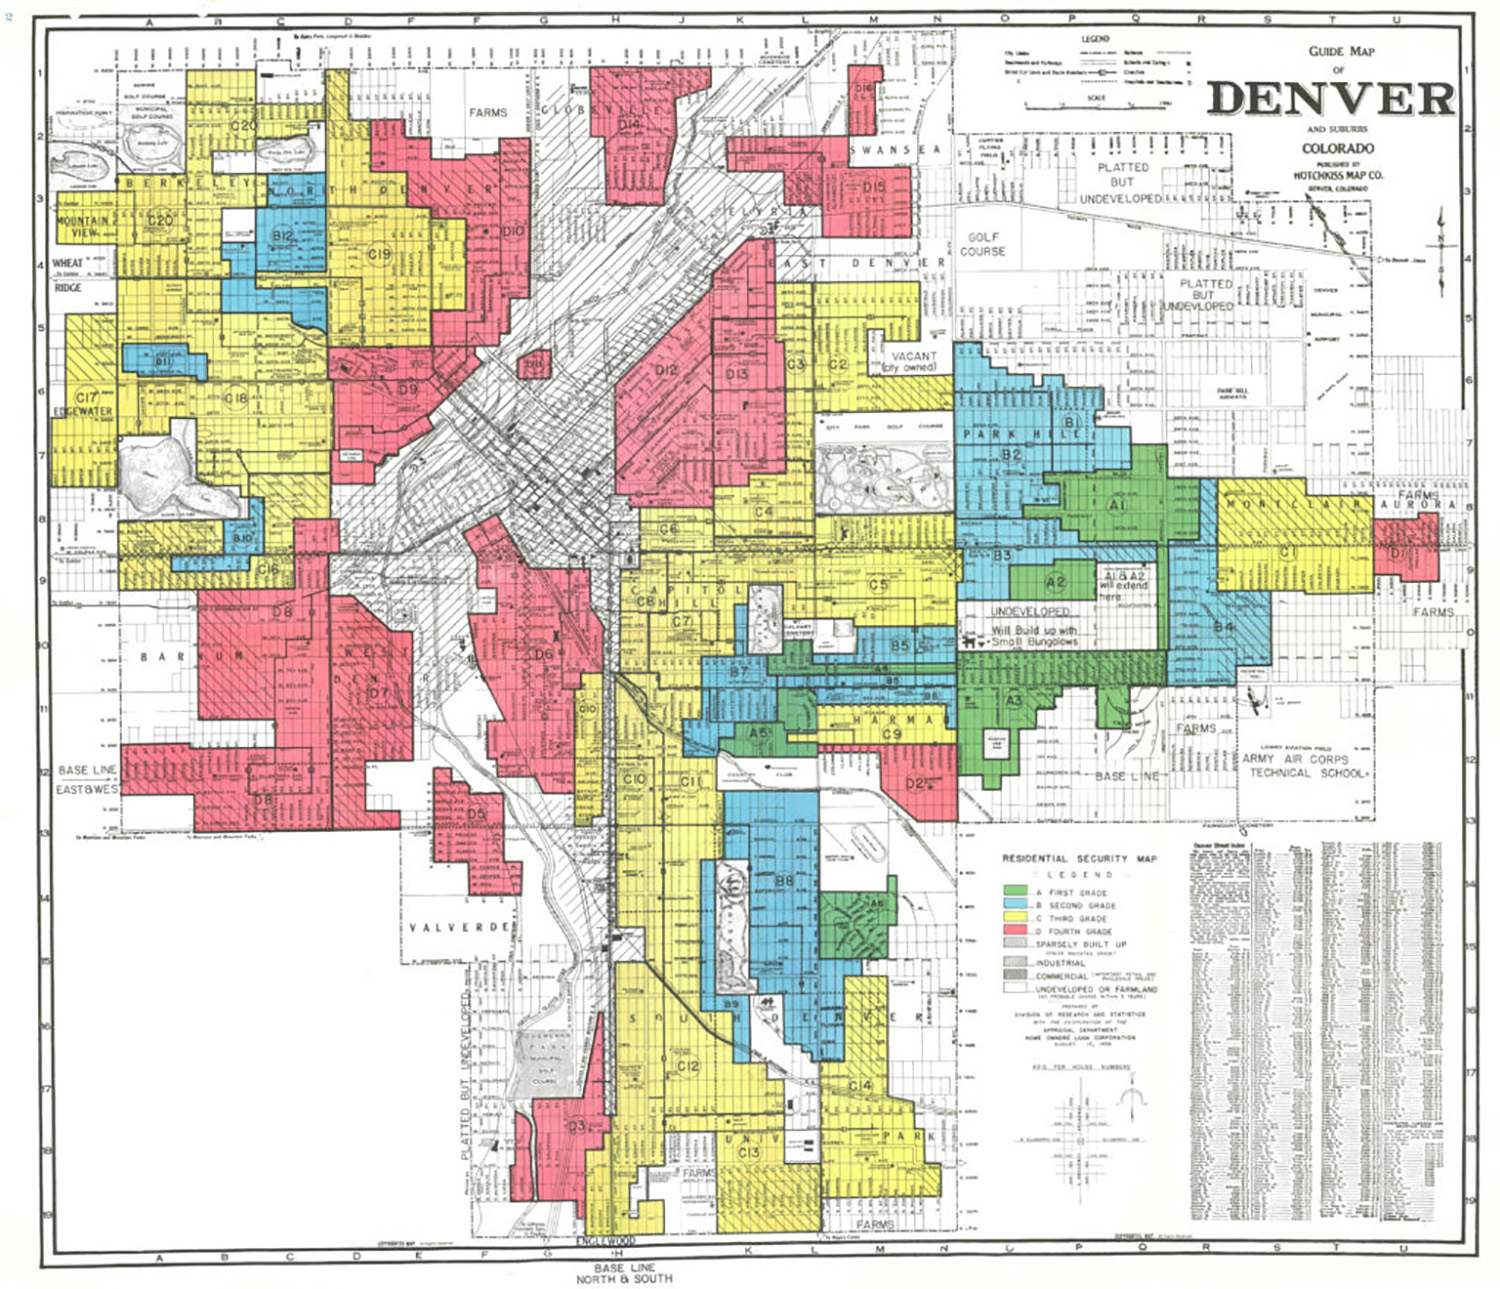 “Residential Security Map” (commonly known as a redlining map) of Denver